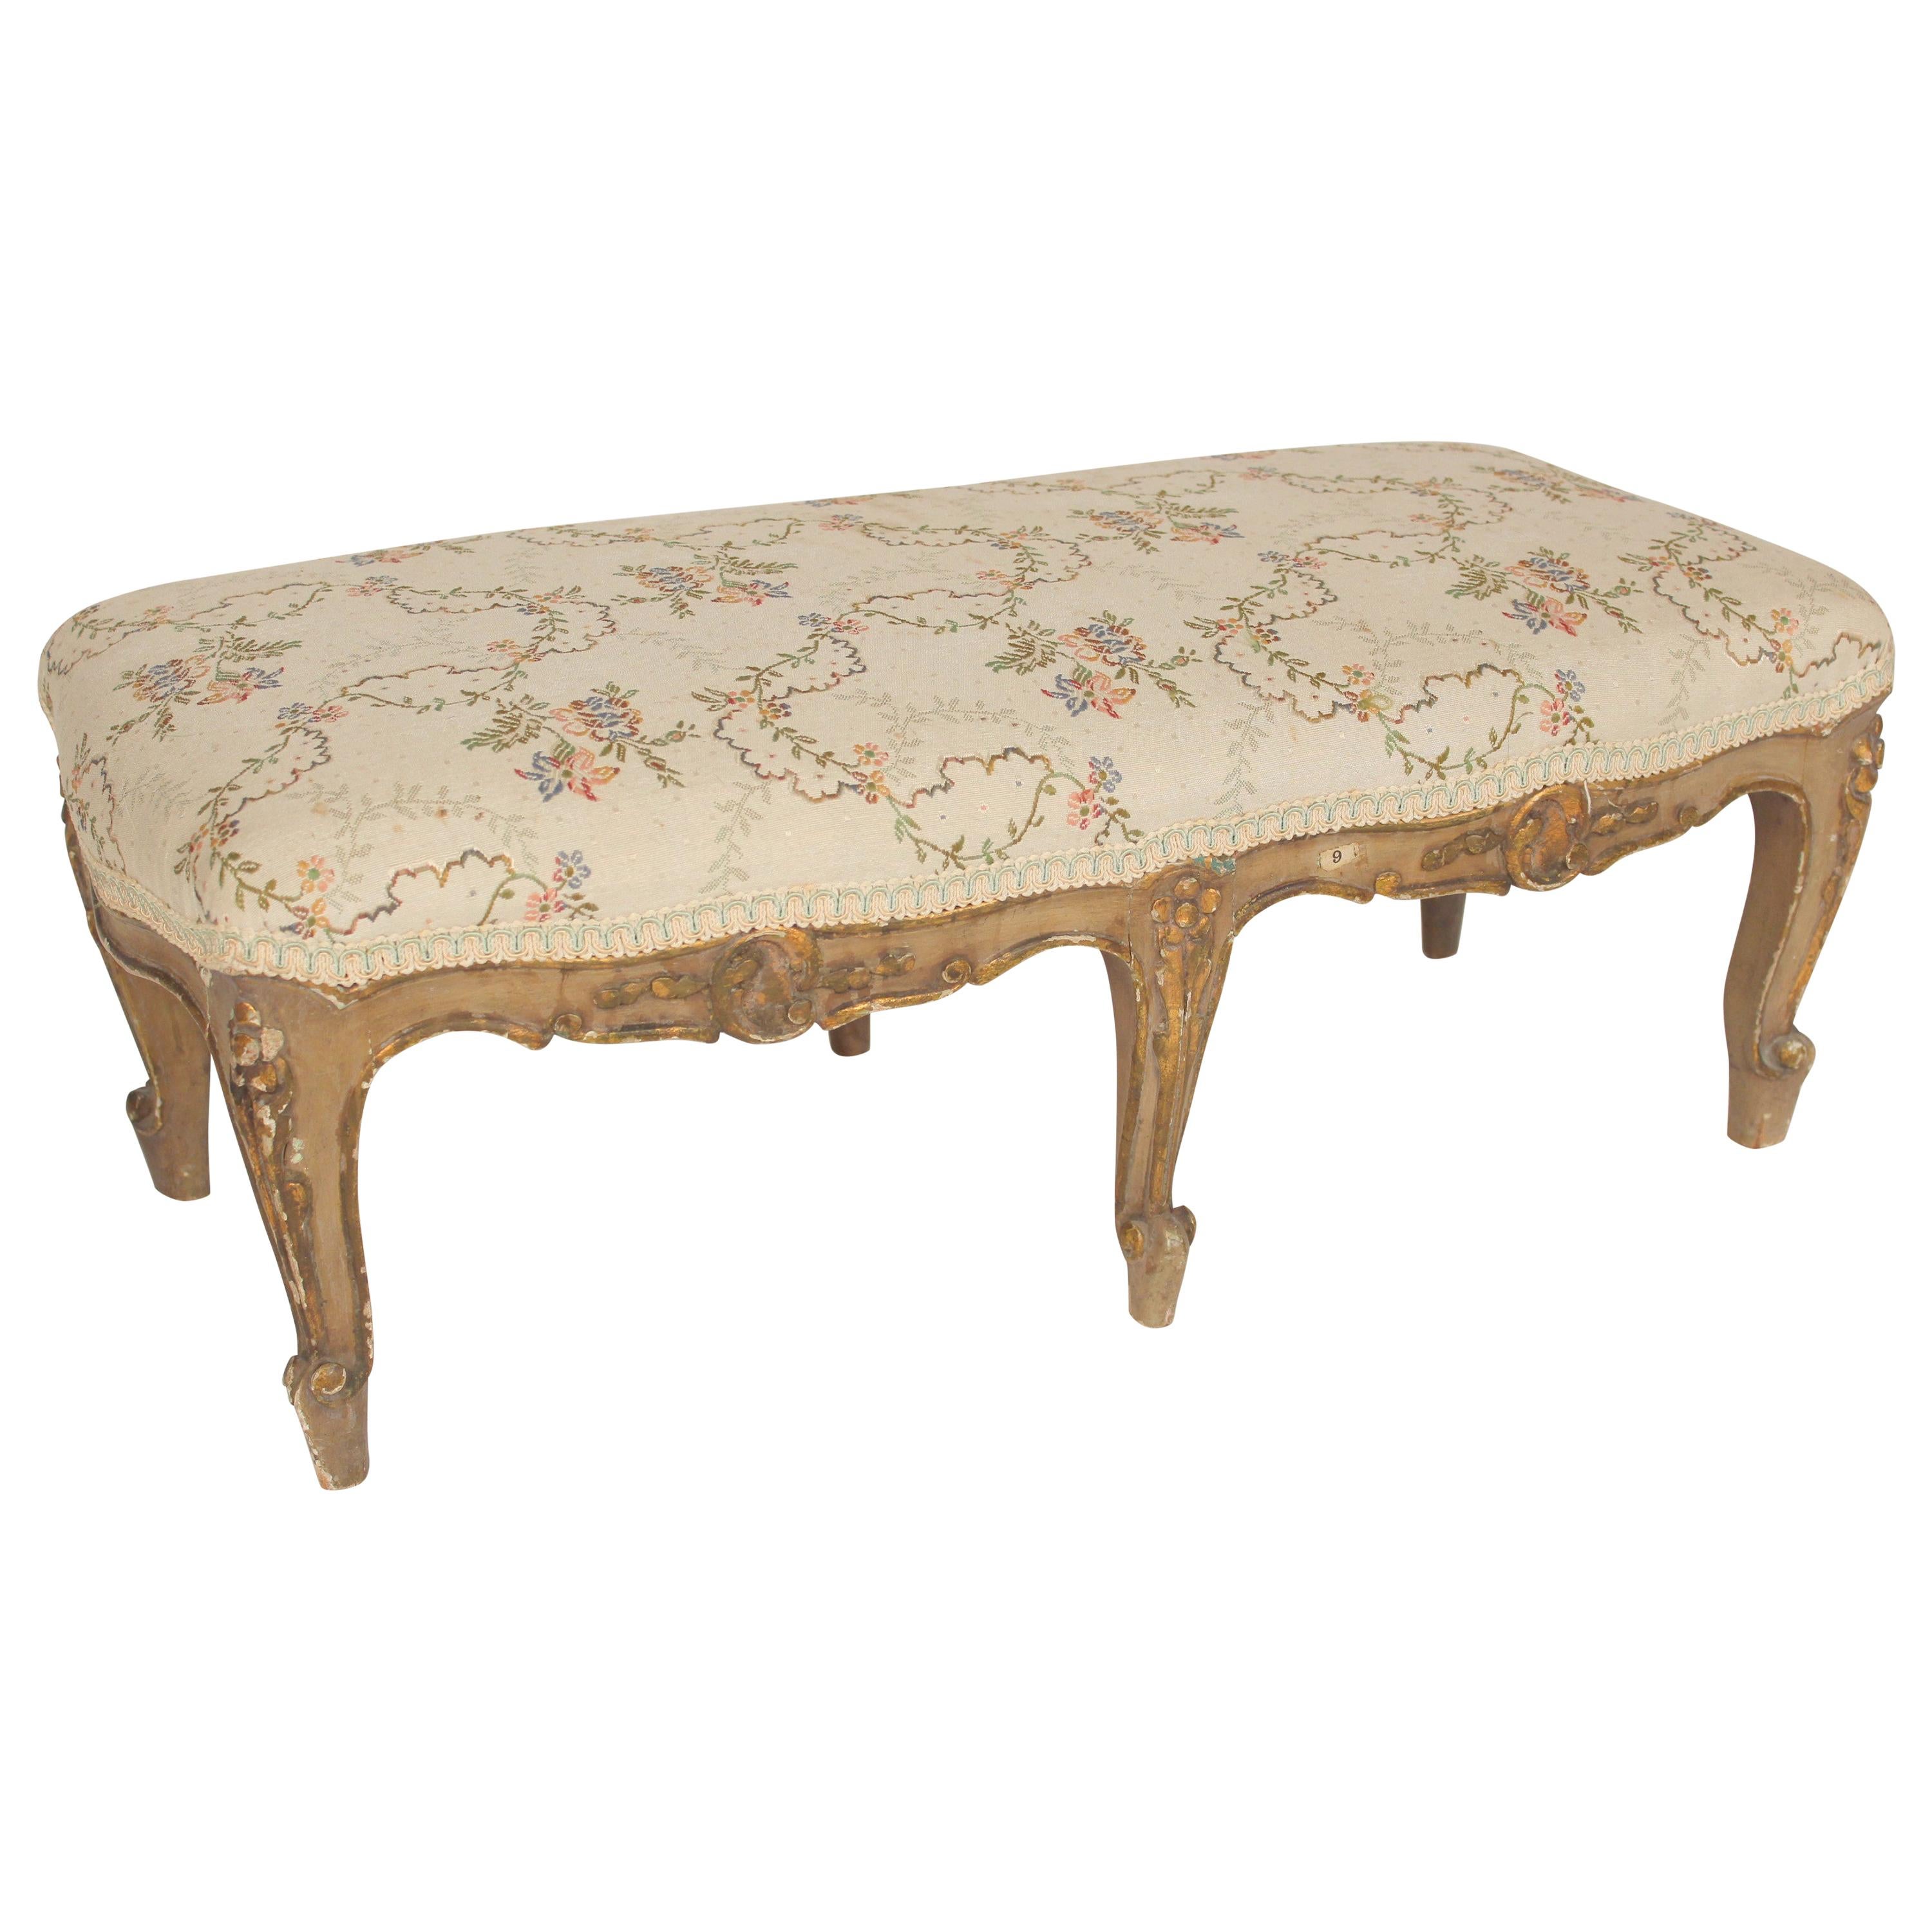 Louis XV Style Painted and Gilt Decorated Footstool